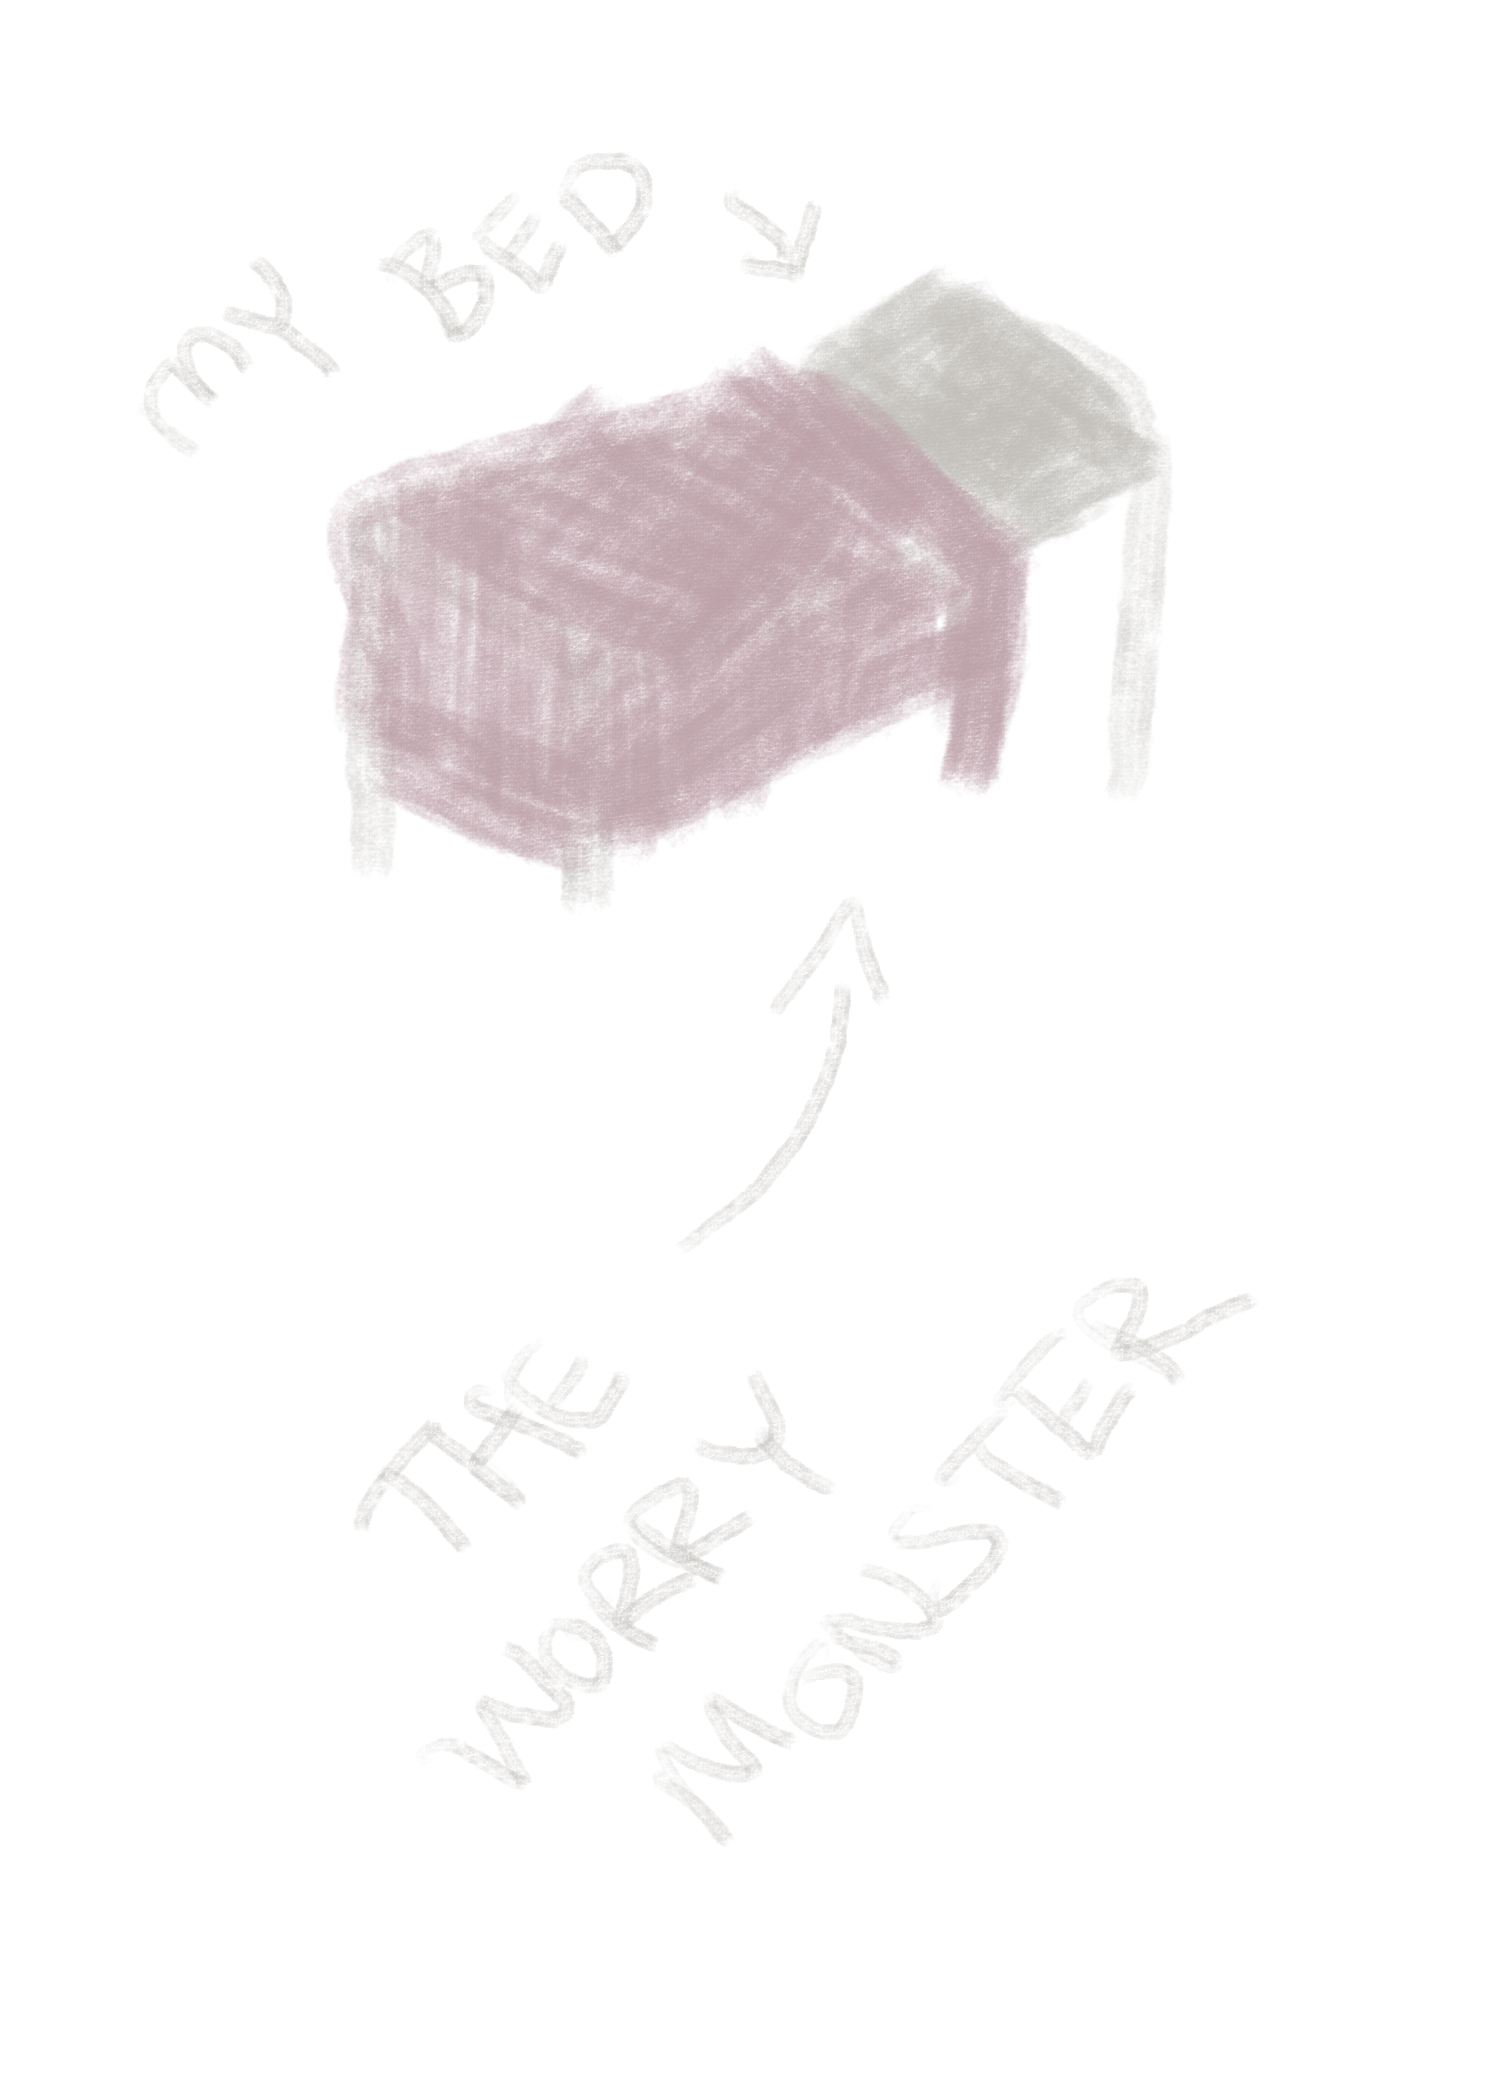 a diagram of a bed with arrows pointing to the monster